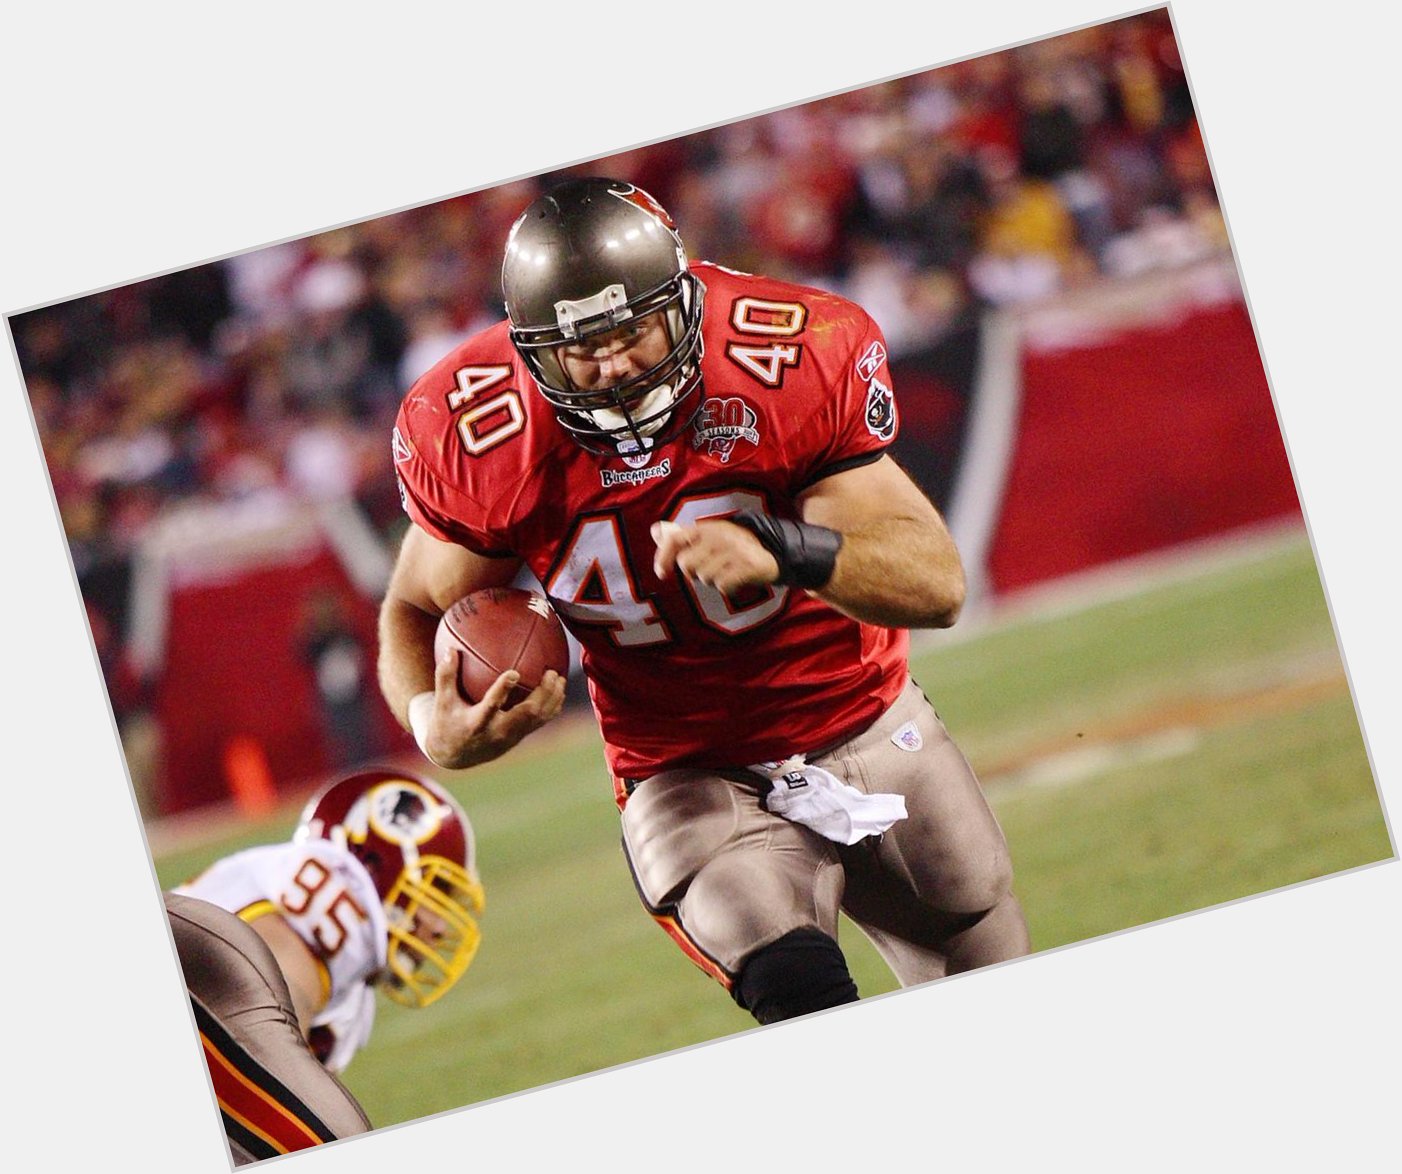 Happy Birthday to Mike Alstott, who turns 41 today! 